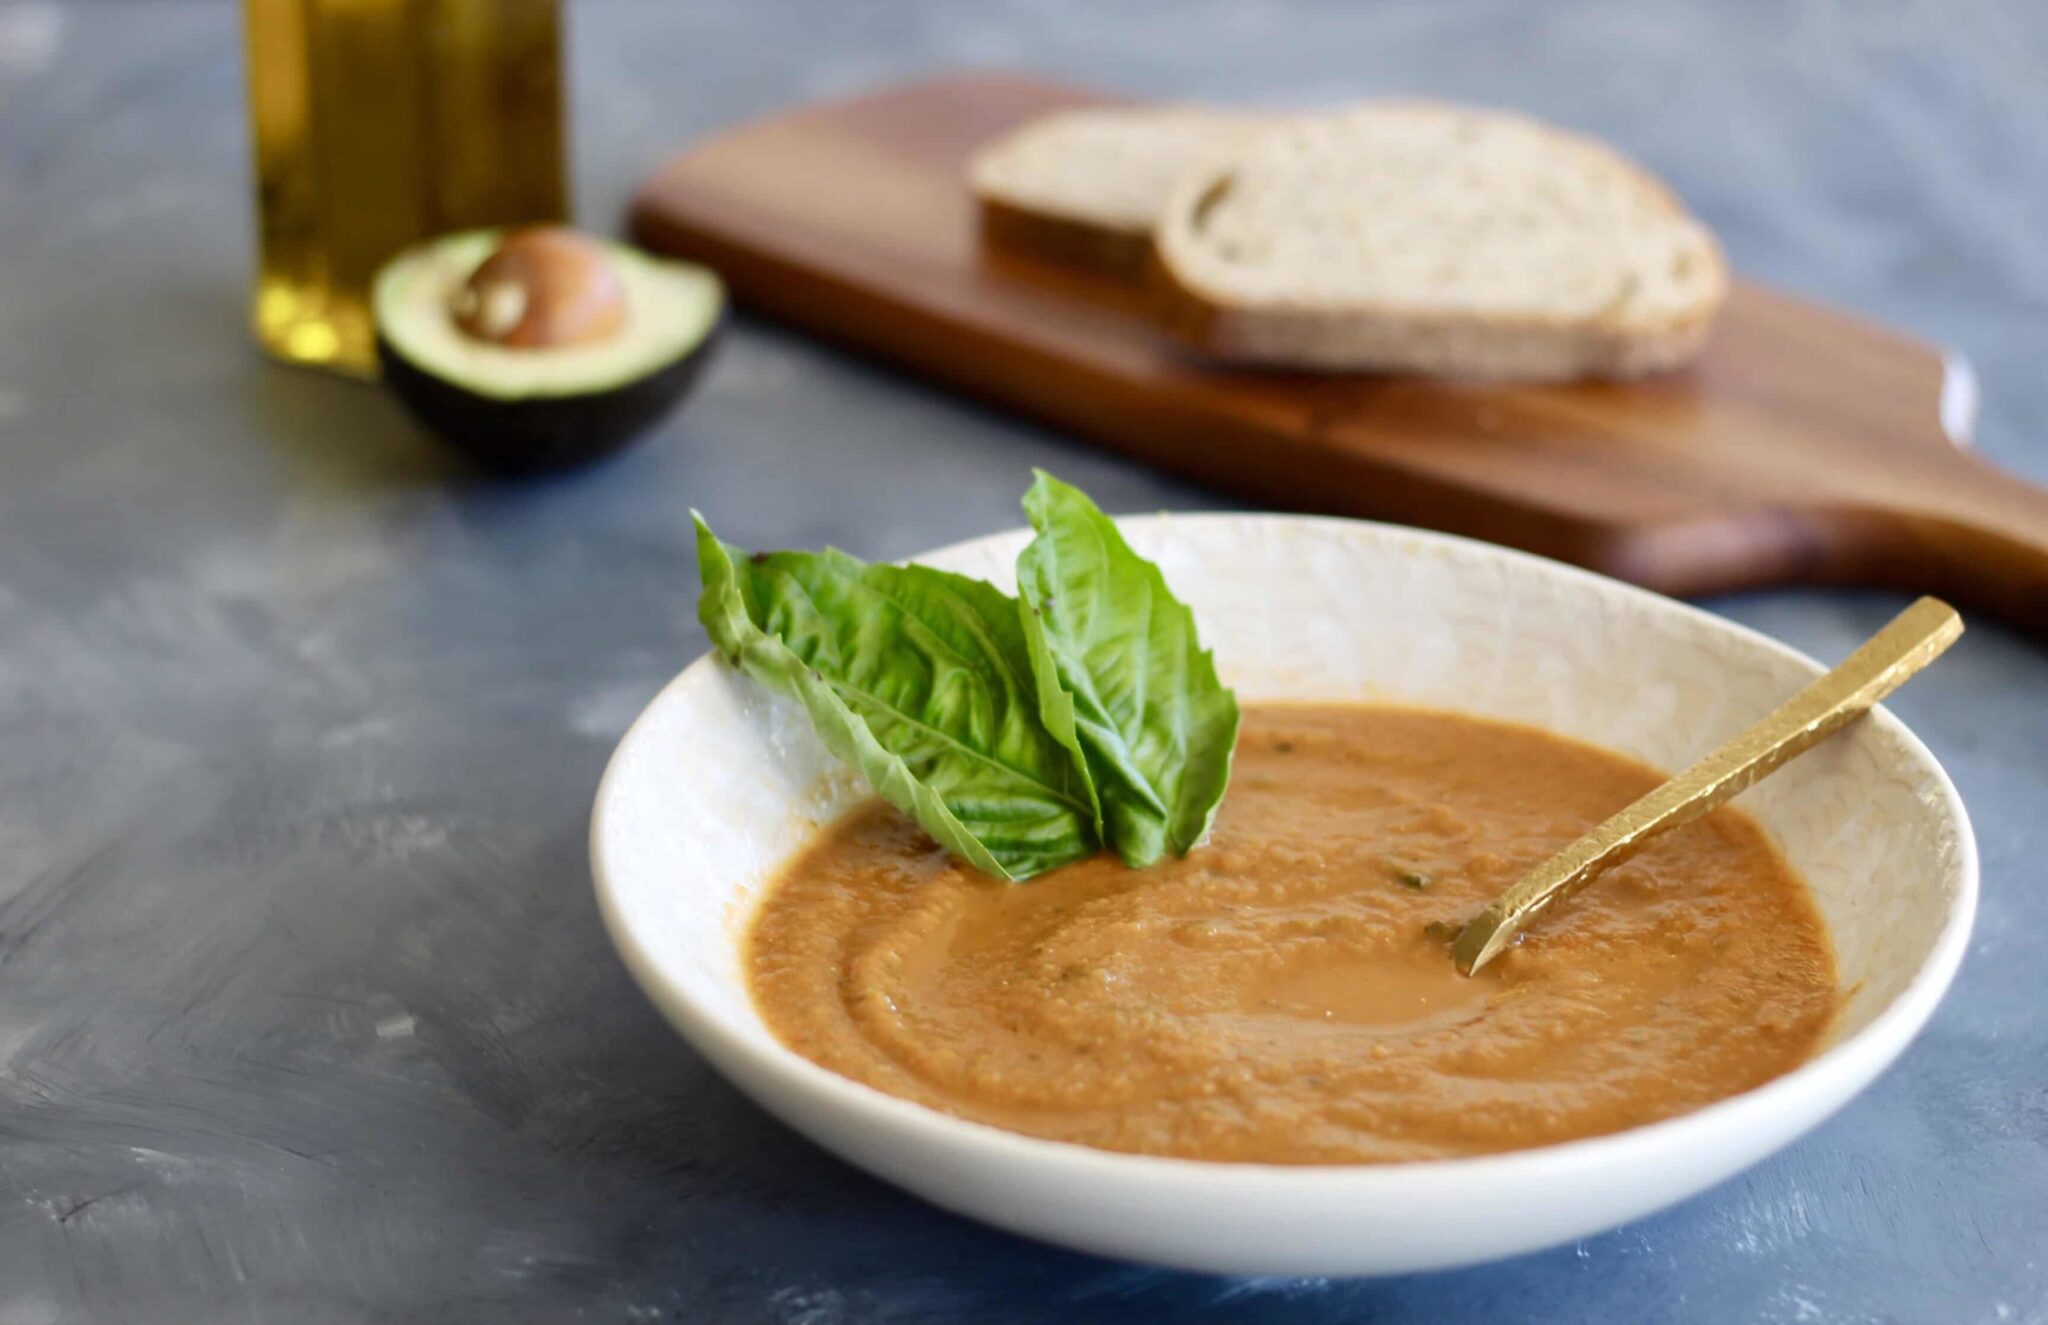 This homemade Tomato Basil Soup is juicy, flavorful, and simple to blend up. The perfect soup recipe to enjoy with seasonal or canned tomatoes! Serve with avocados, parmesan cheese, and whole grain bread.